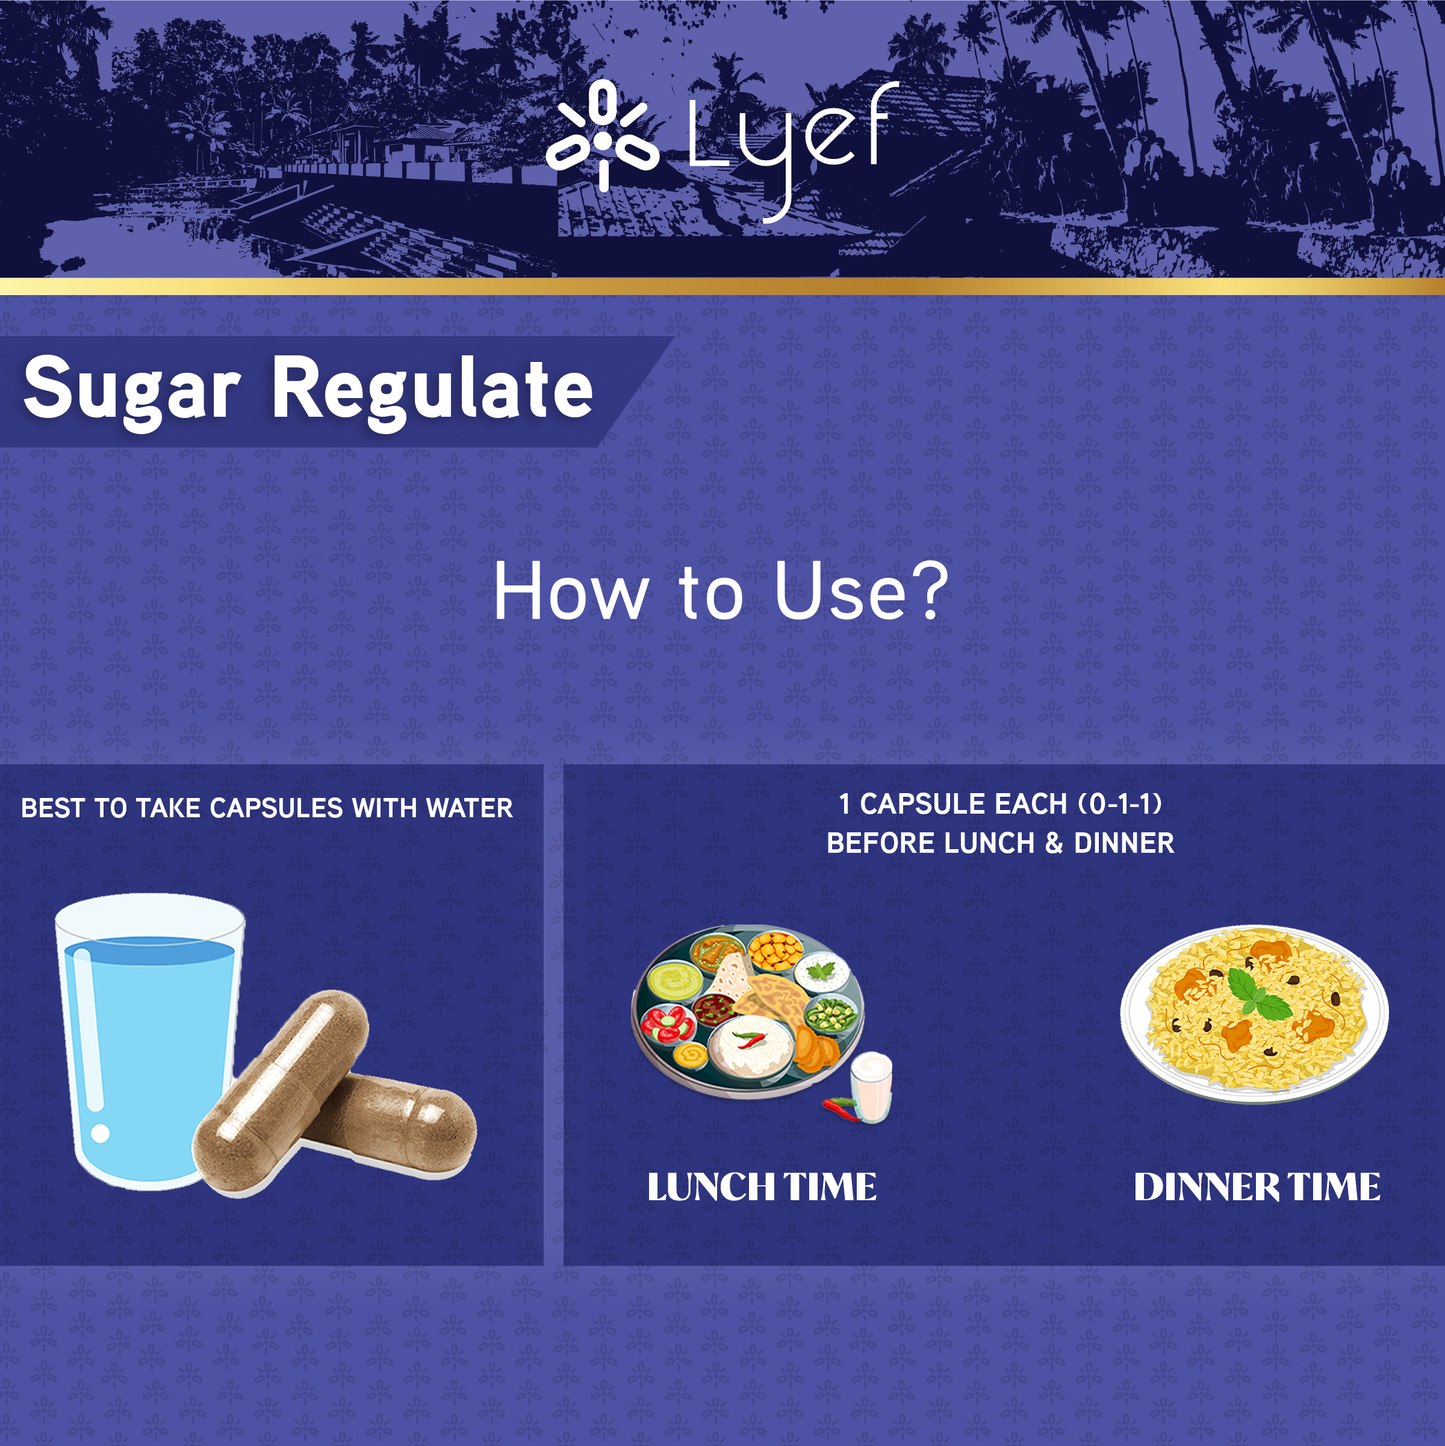 Sugar Regulate - How To Use?